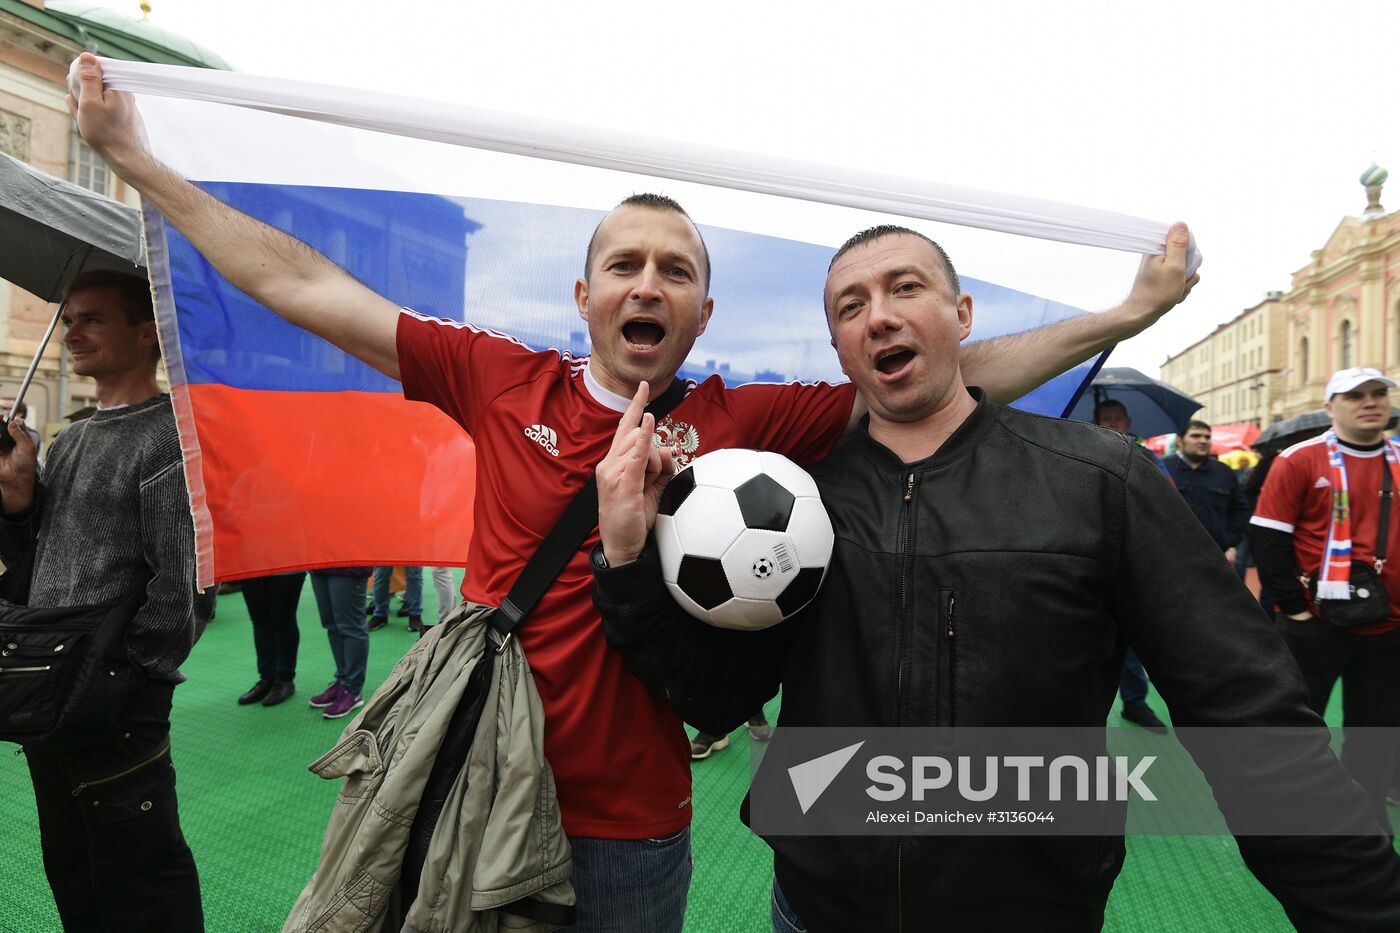 Fans watch Russia vs. Portugal match at 2017 FIFA Confederations Cup fan zone in St. Petersburg